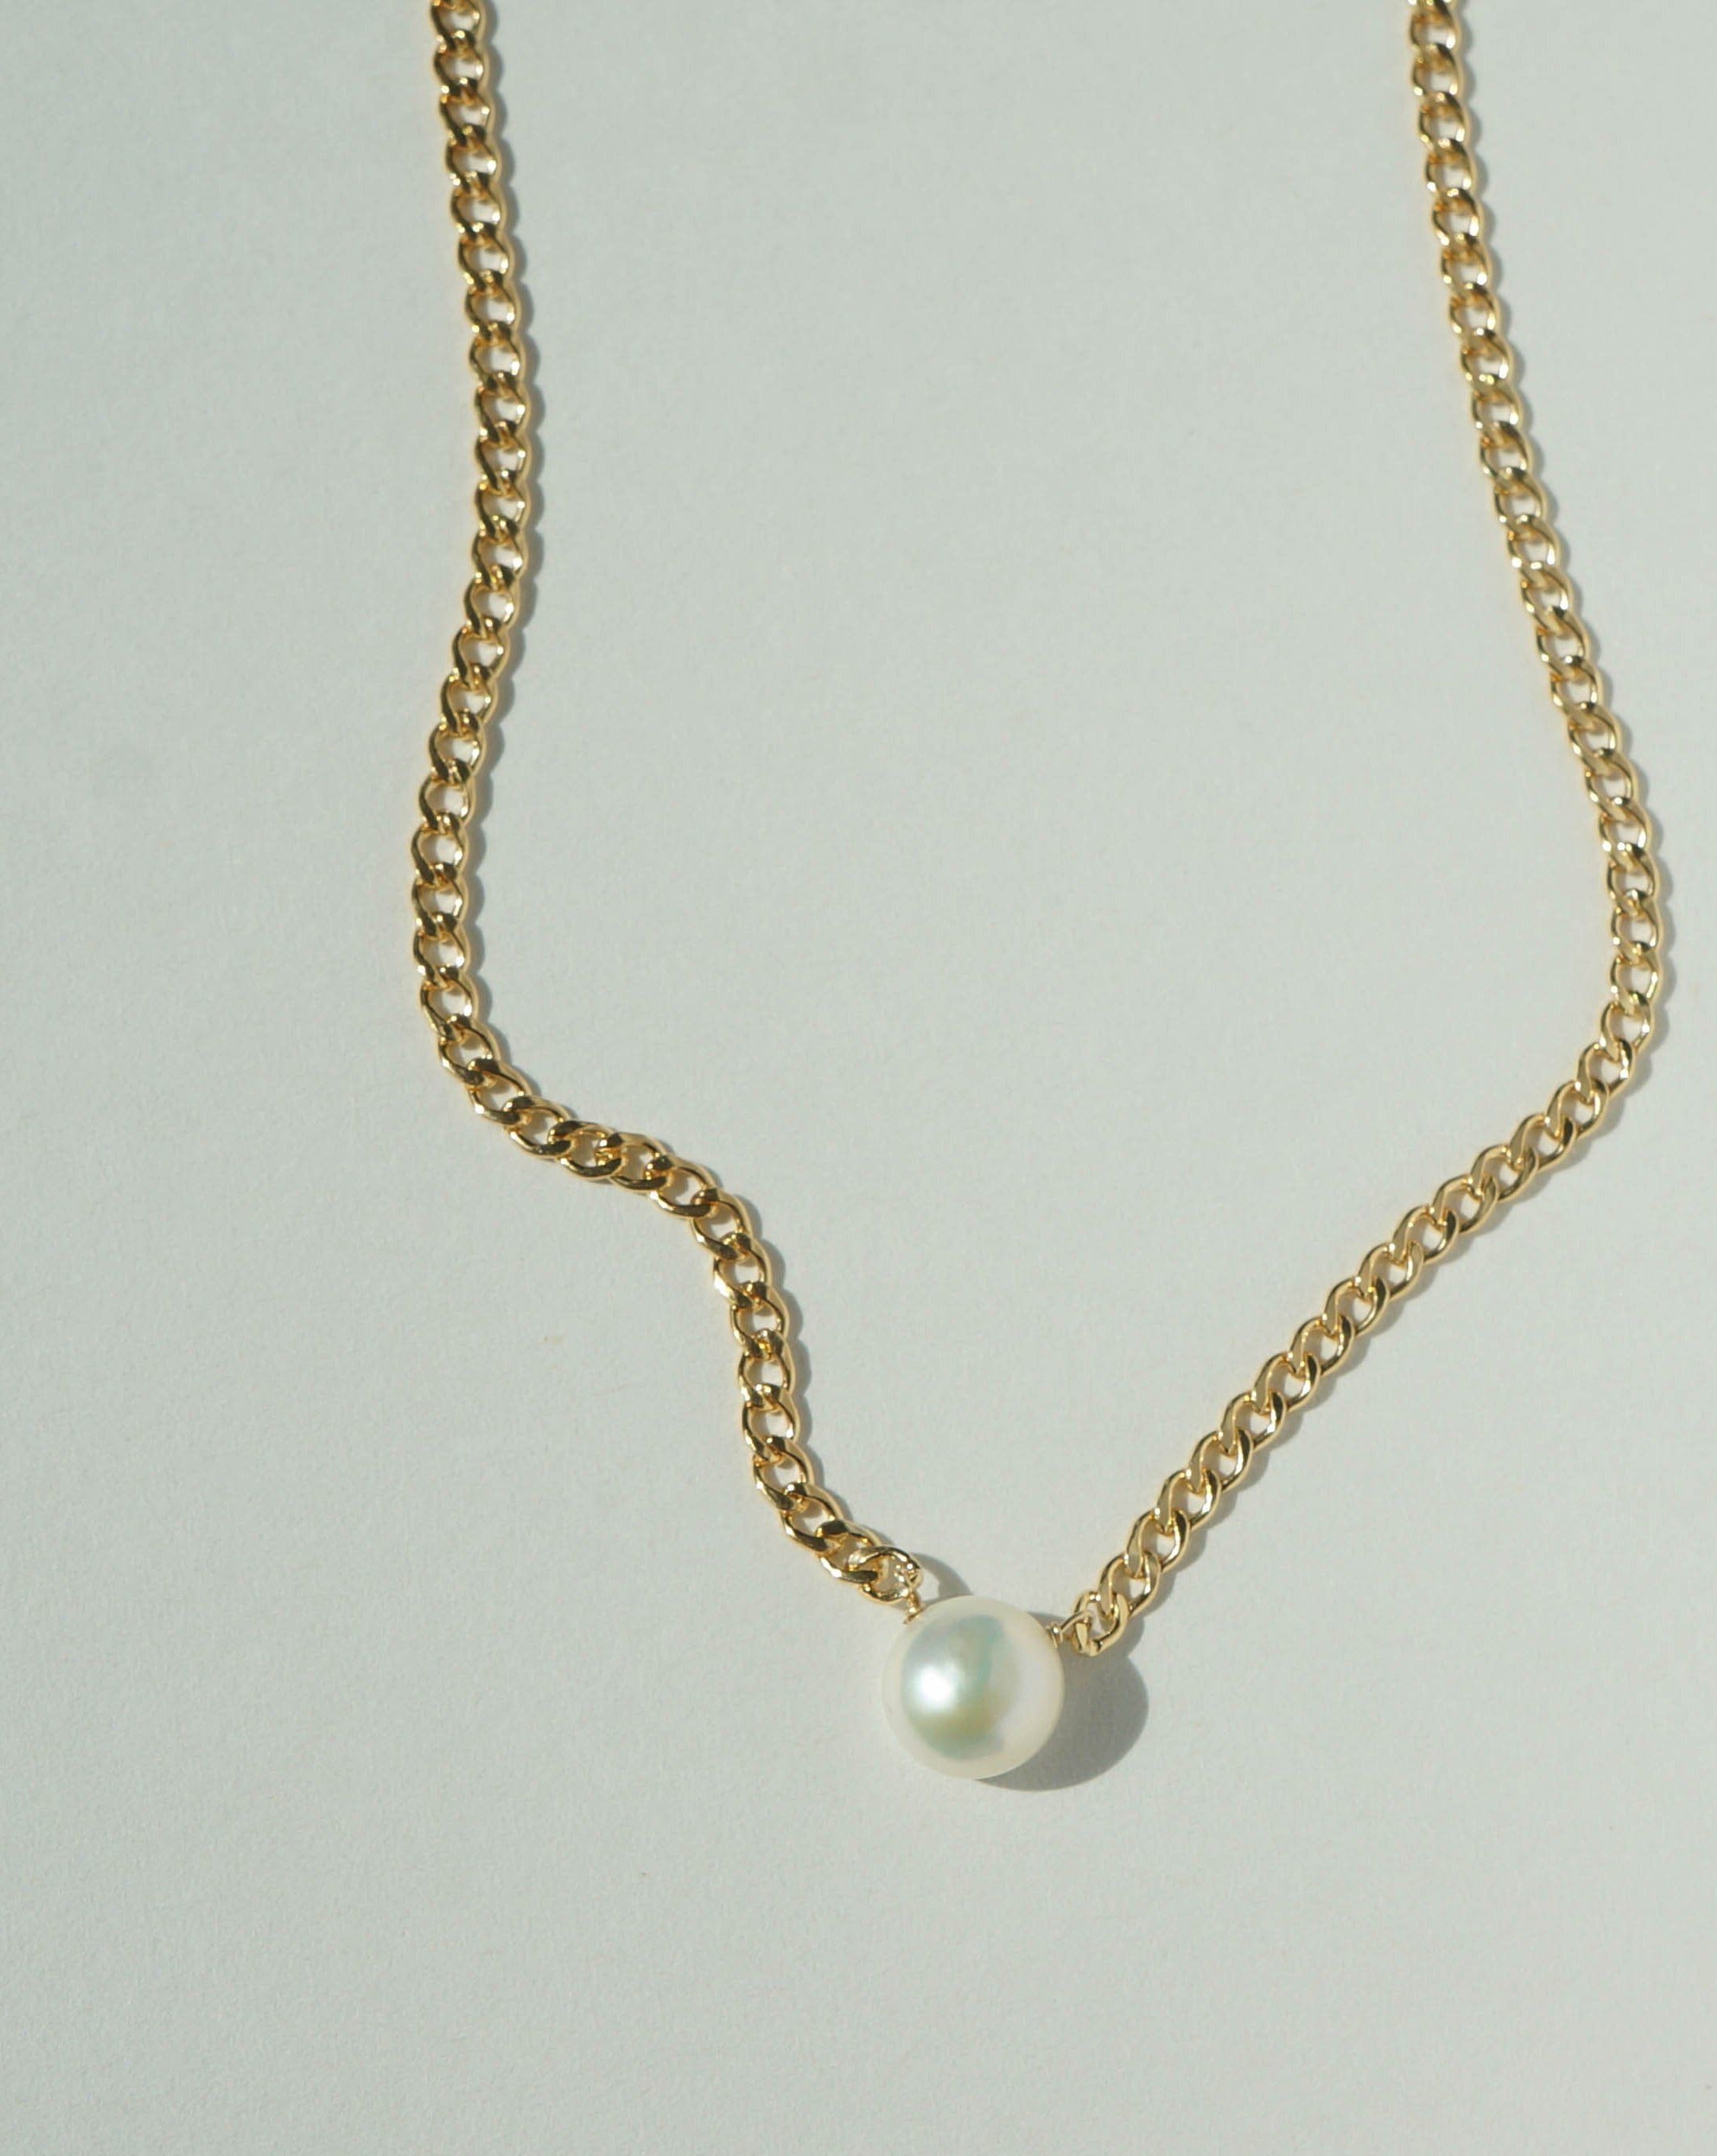 Harper Necklace by KOZAKH. A 16 to 18 inch adjustable length braided chain necklace in 14K Gold Filled, featuring a flat backed Freshwater Pearl.